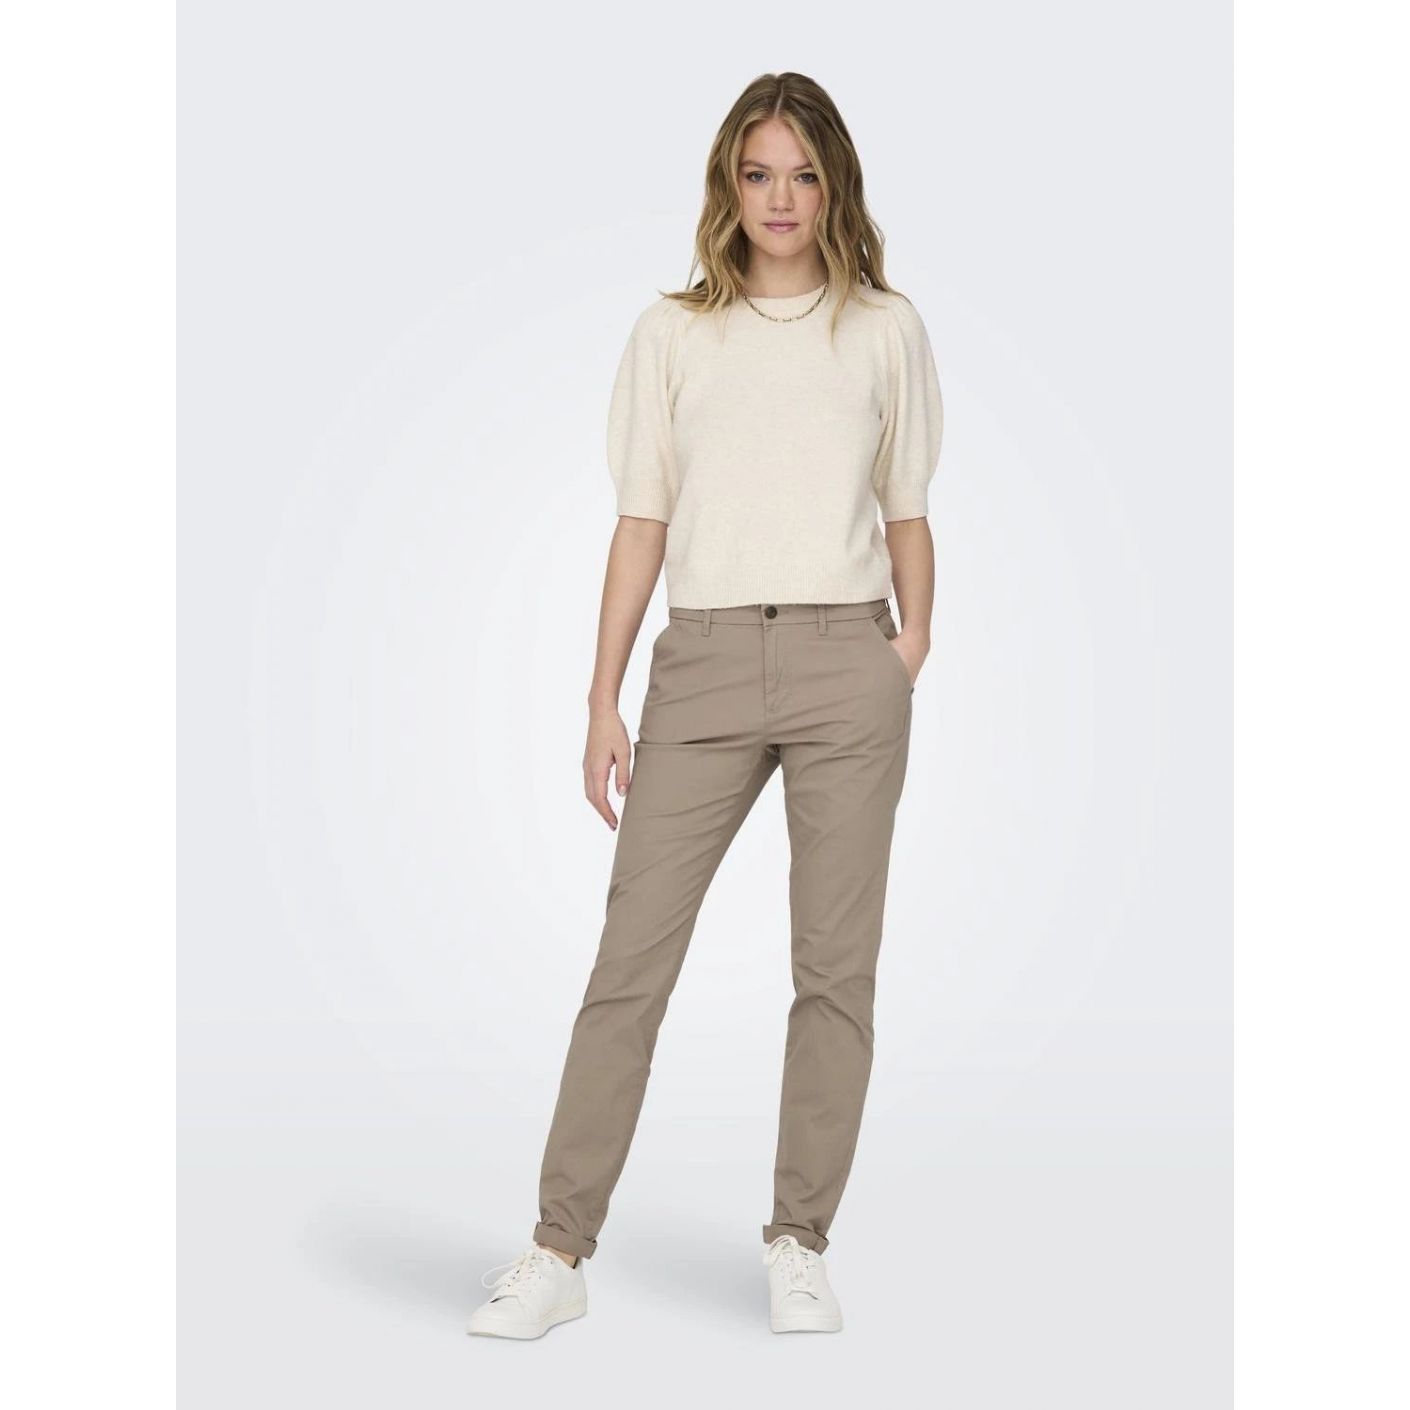 Only Pantaloni Classic Chinos Brown/Silver Mink da Donna